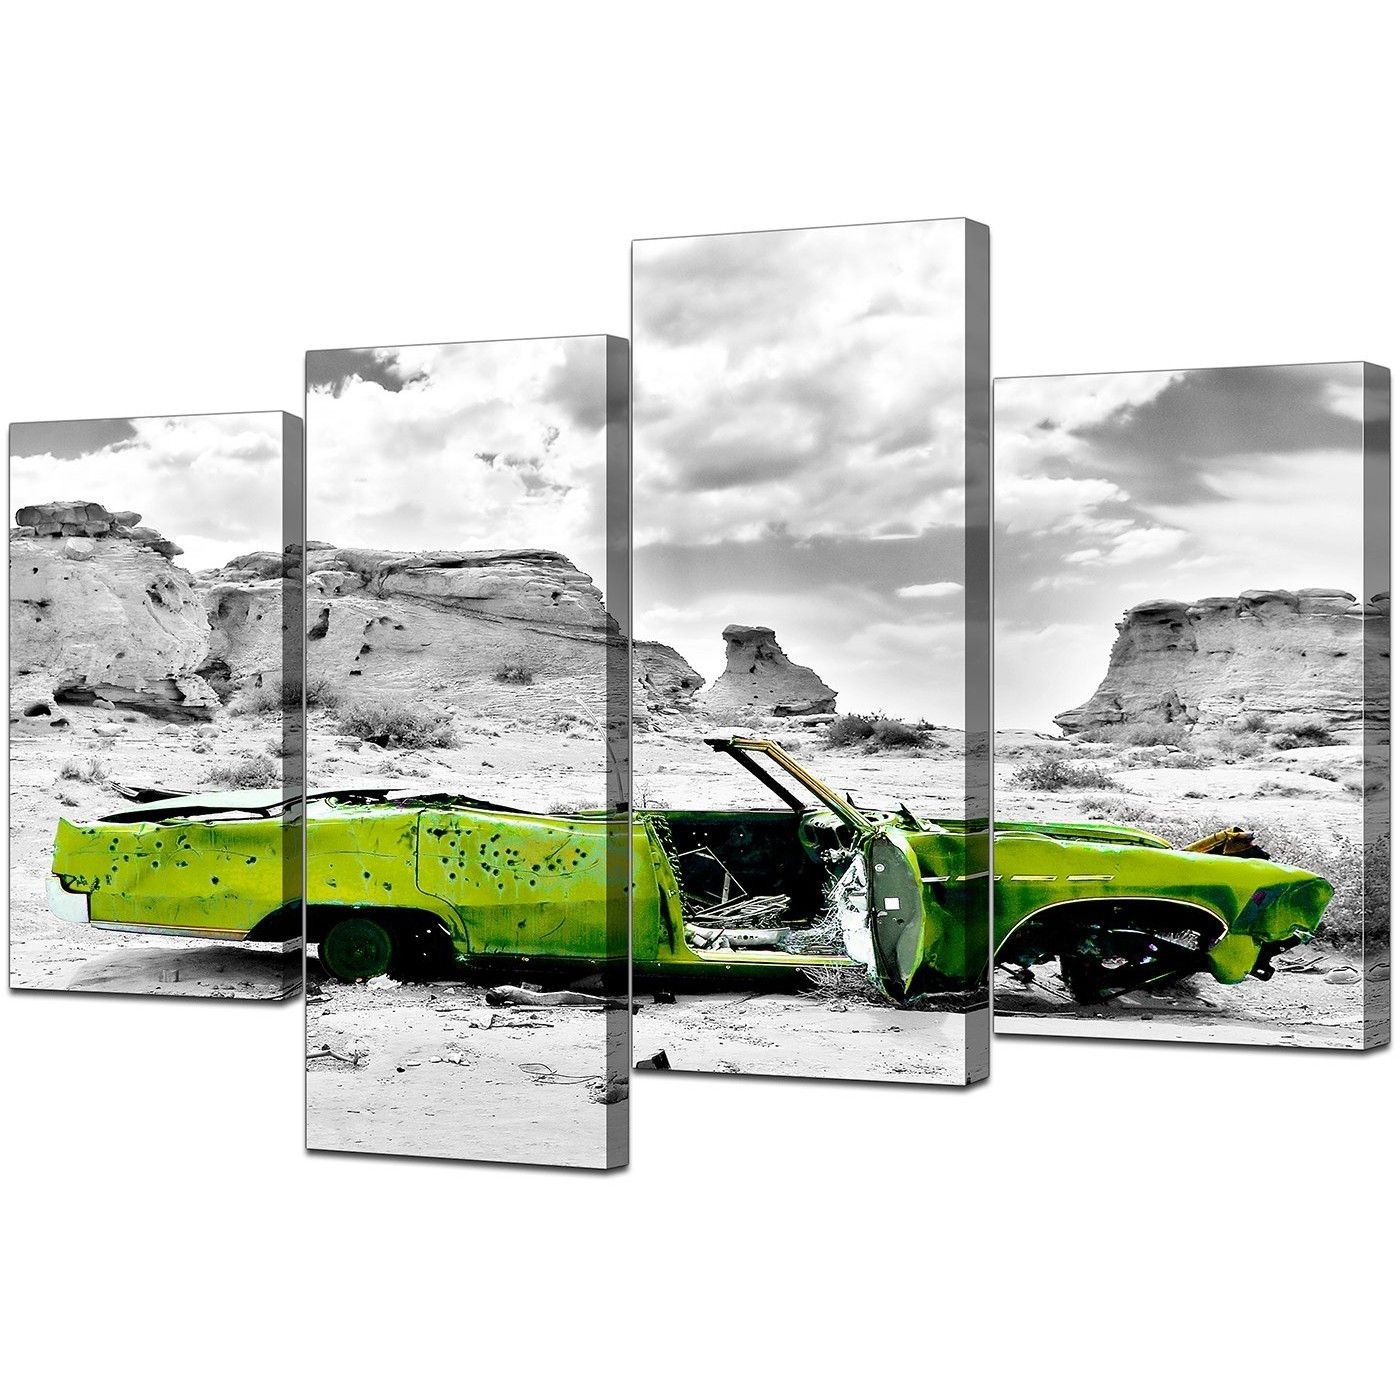 Popular Canvas Art Of Green Car In Black & White For Your Office Within Green Canvas Wall Art (View 1 of 15)